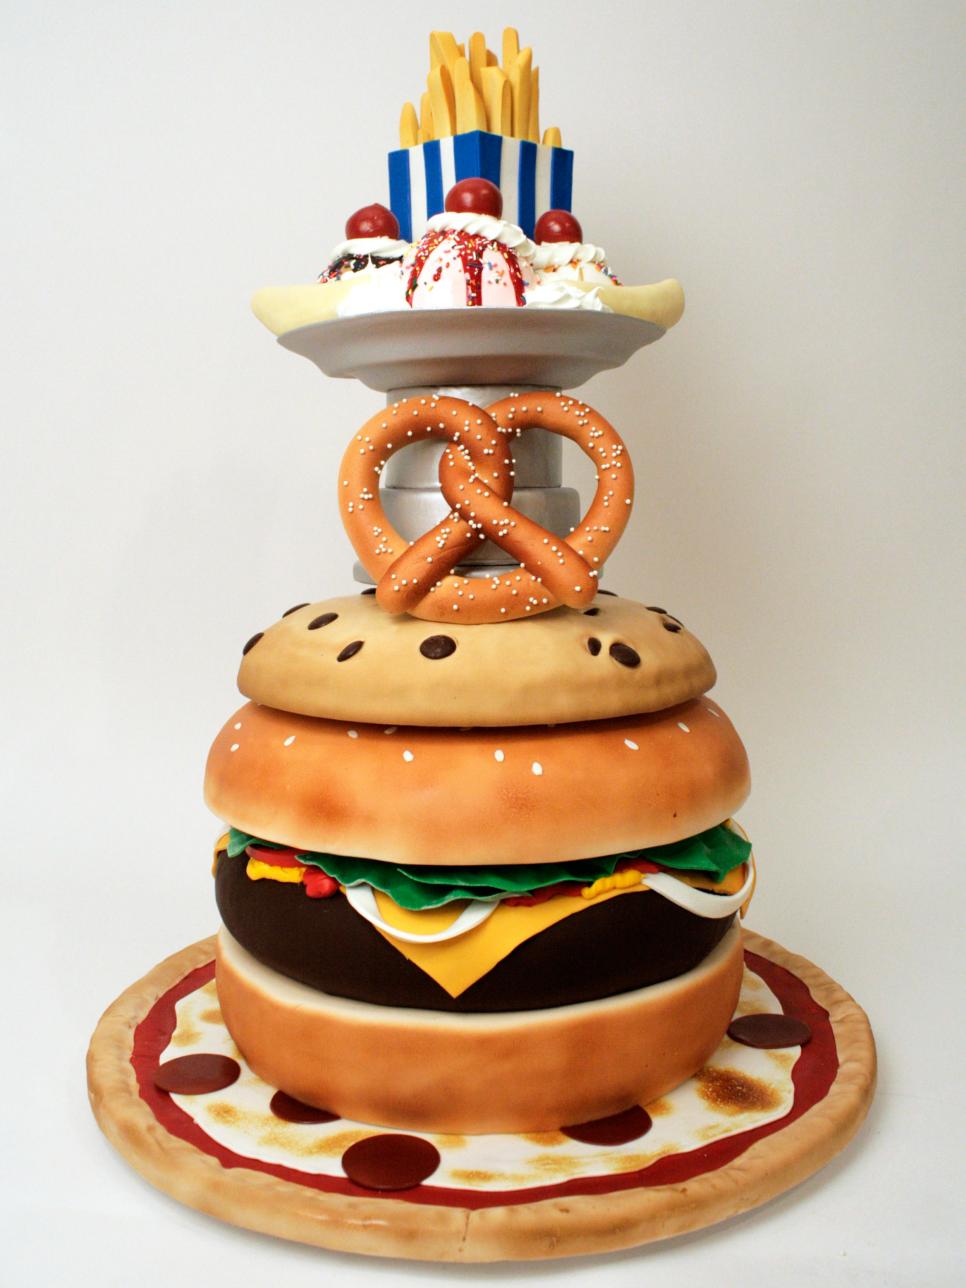 The Creative Cakes from Charm City Cakes Duff Goldman